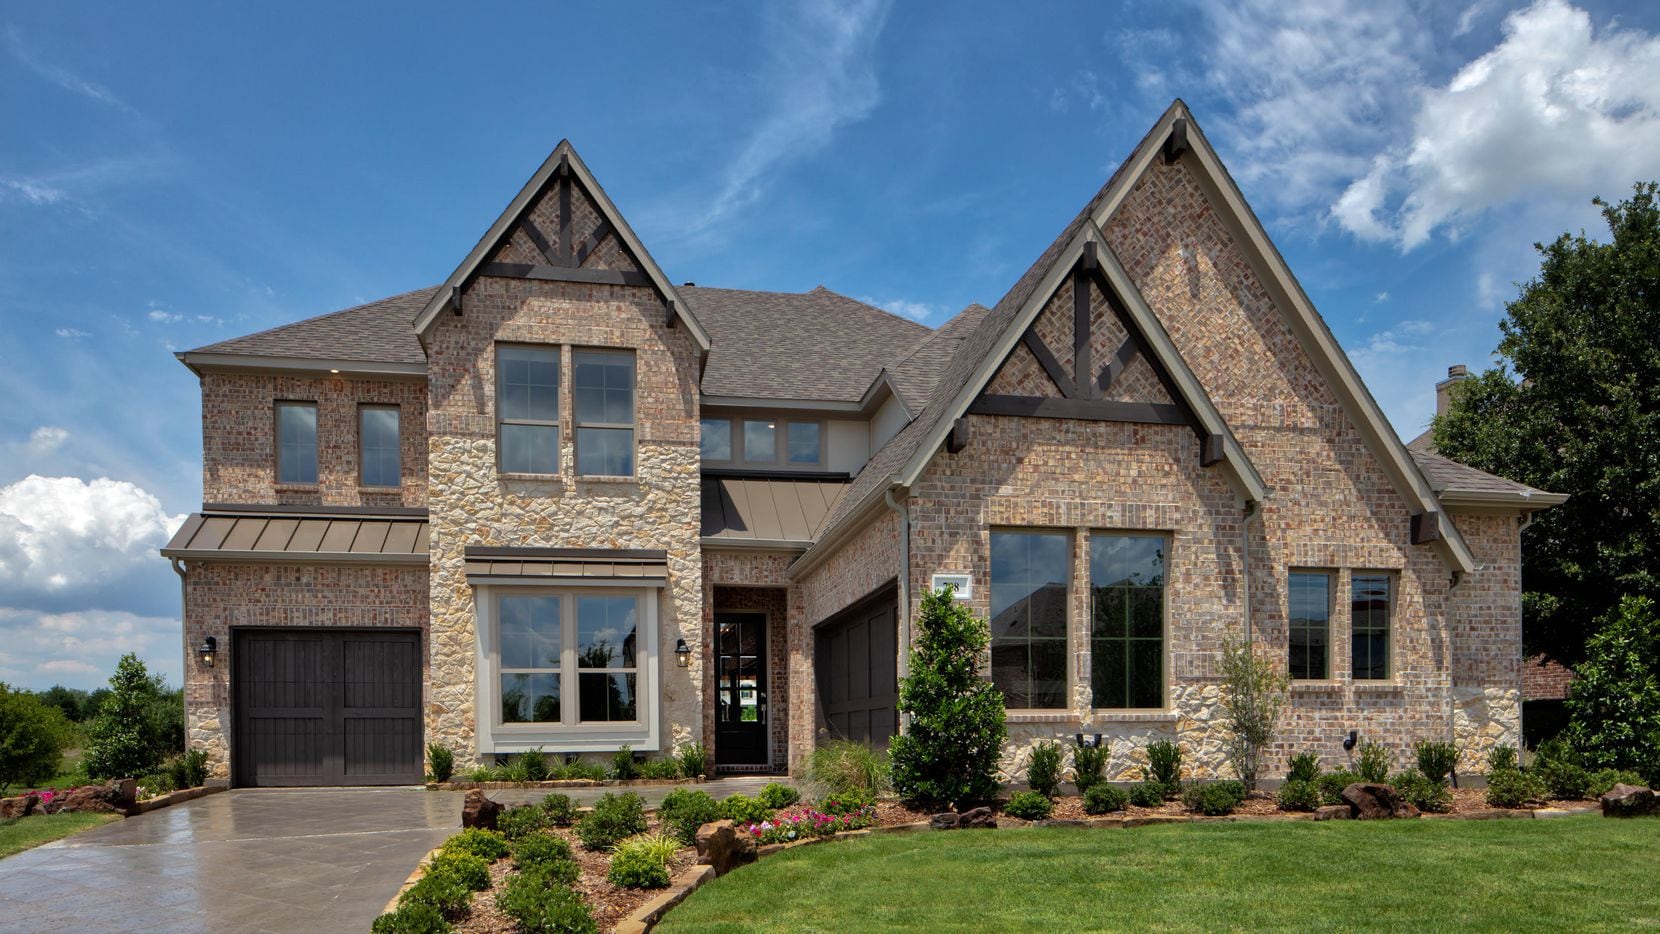 Pacesetter Homes plans to sell houses in the D-FW area priced from the $220,000s to more...